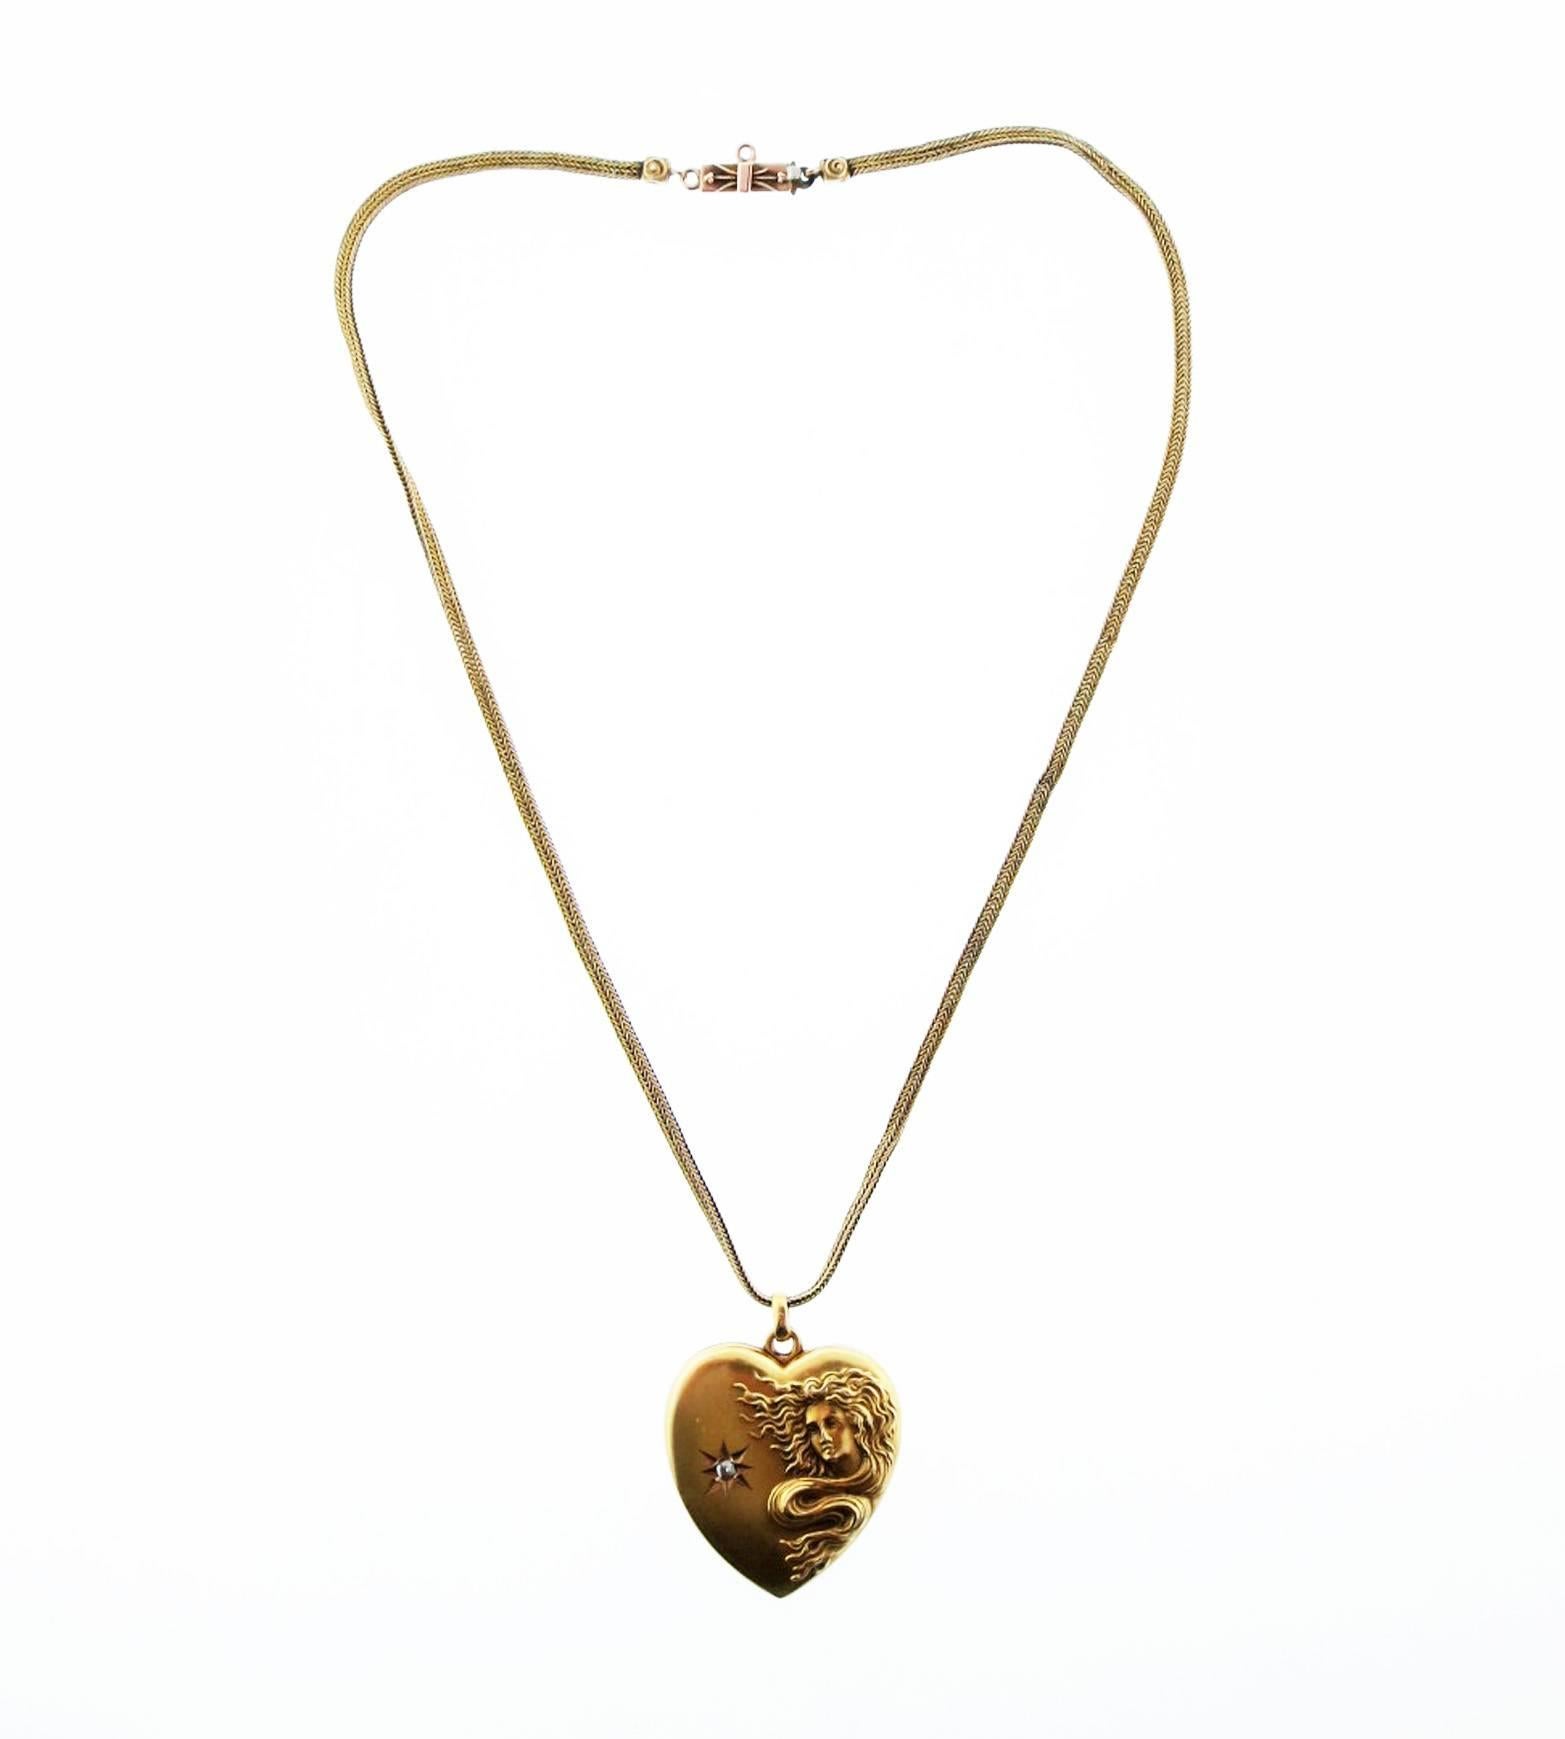 Original patina 14kt. yellow gold Art Nouveau heart shape locket measuring approx 1.25 inches in length with a high relief female form on the front with an accent diamond . The back is engraved with initials. The 14kt. yellow gold antique cable link